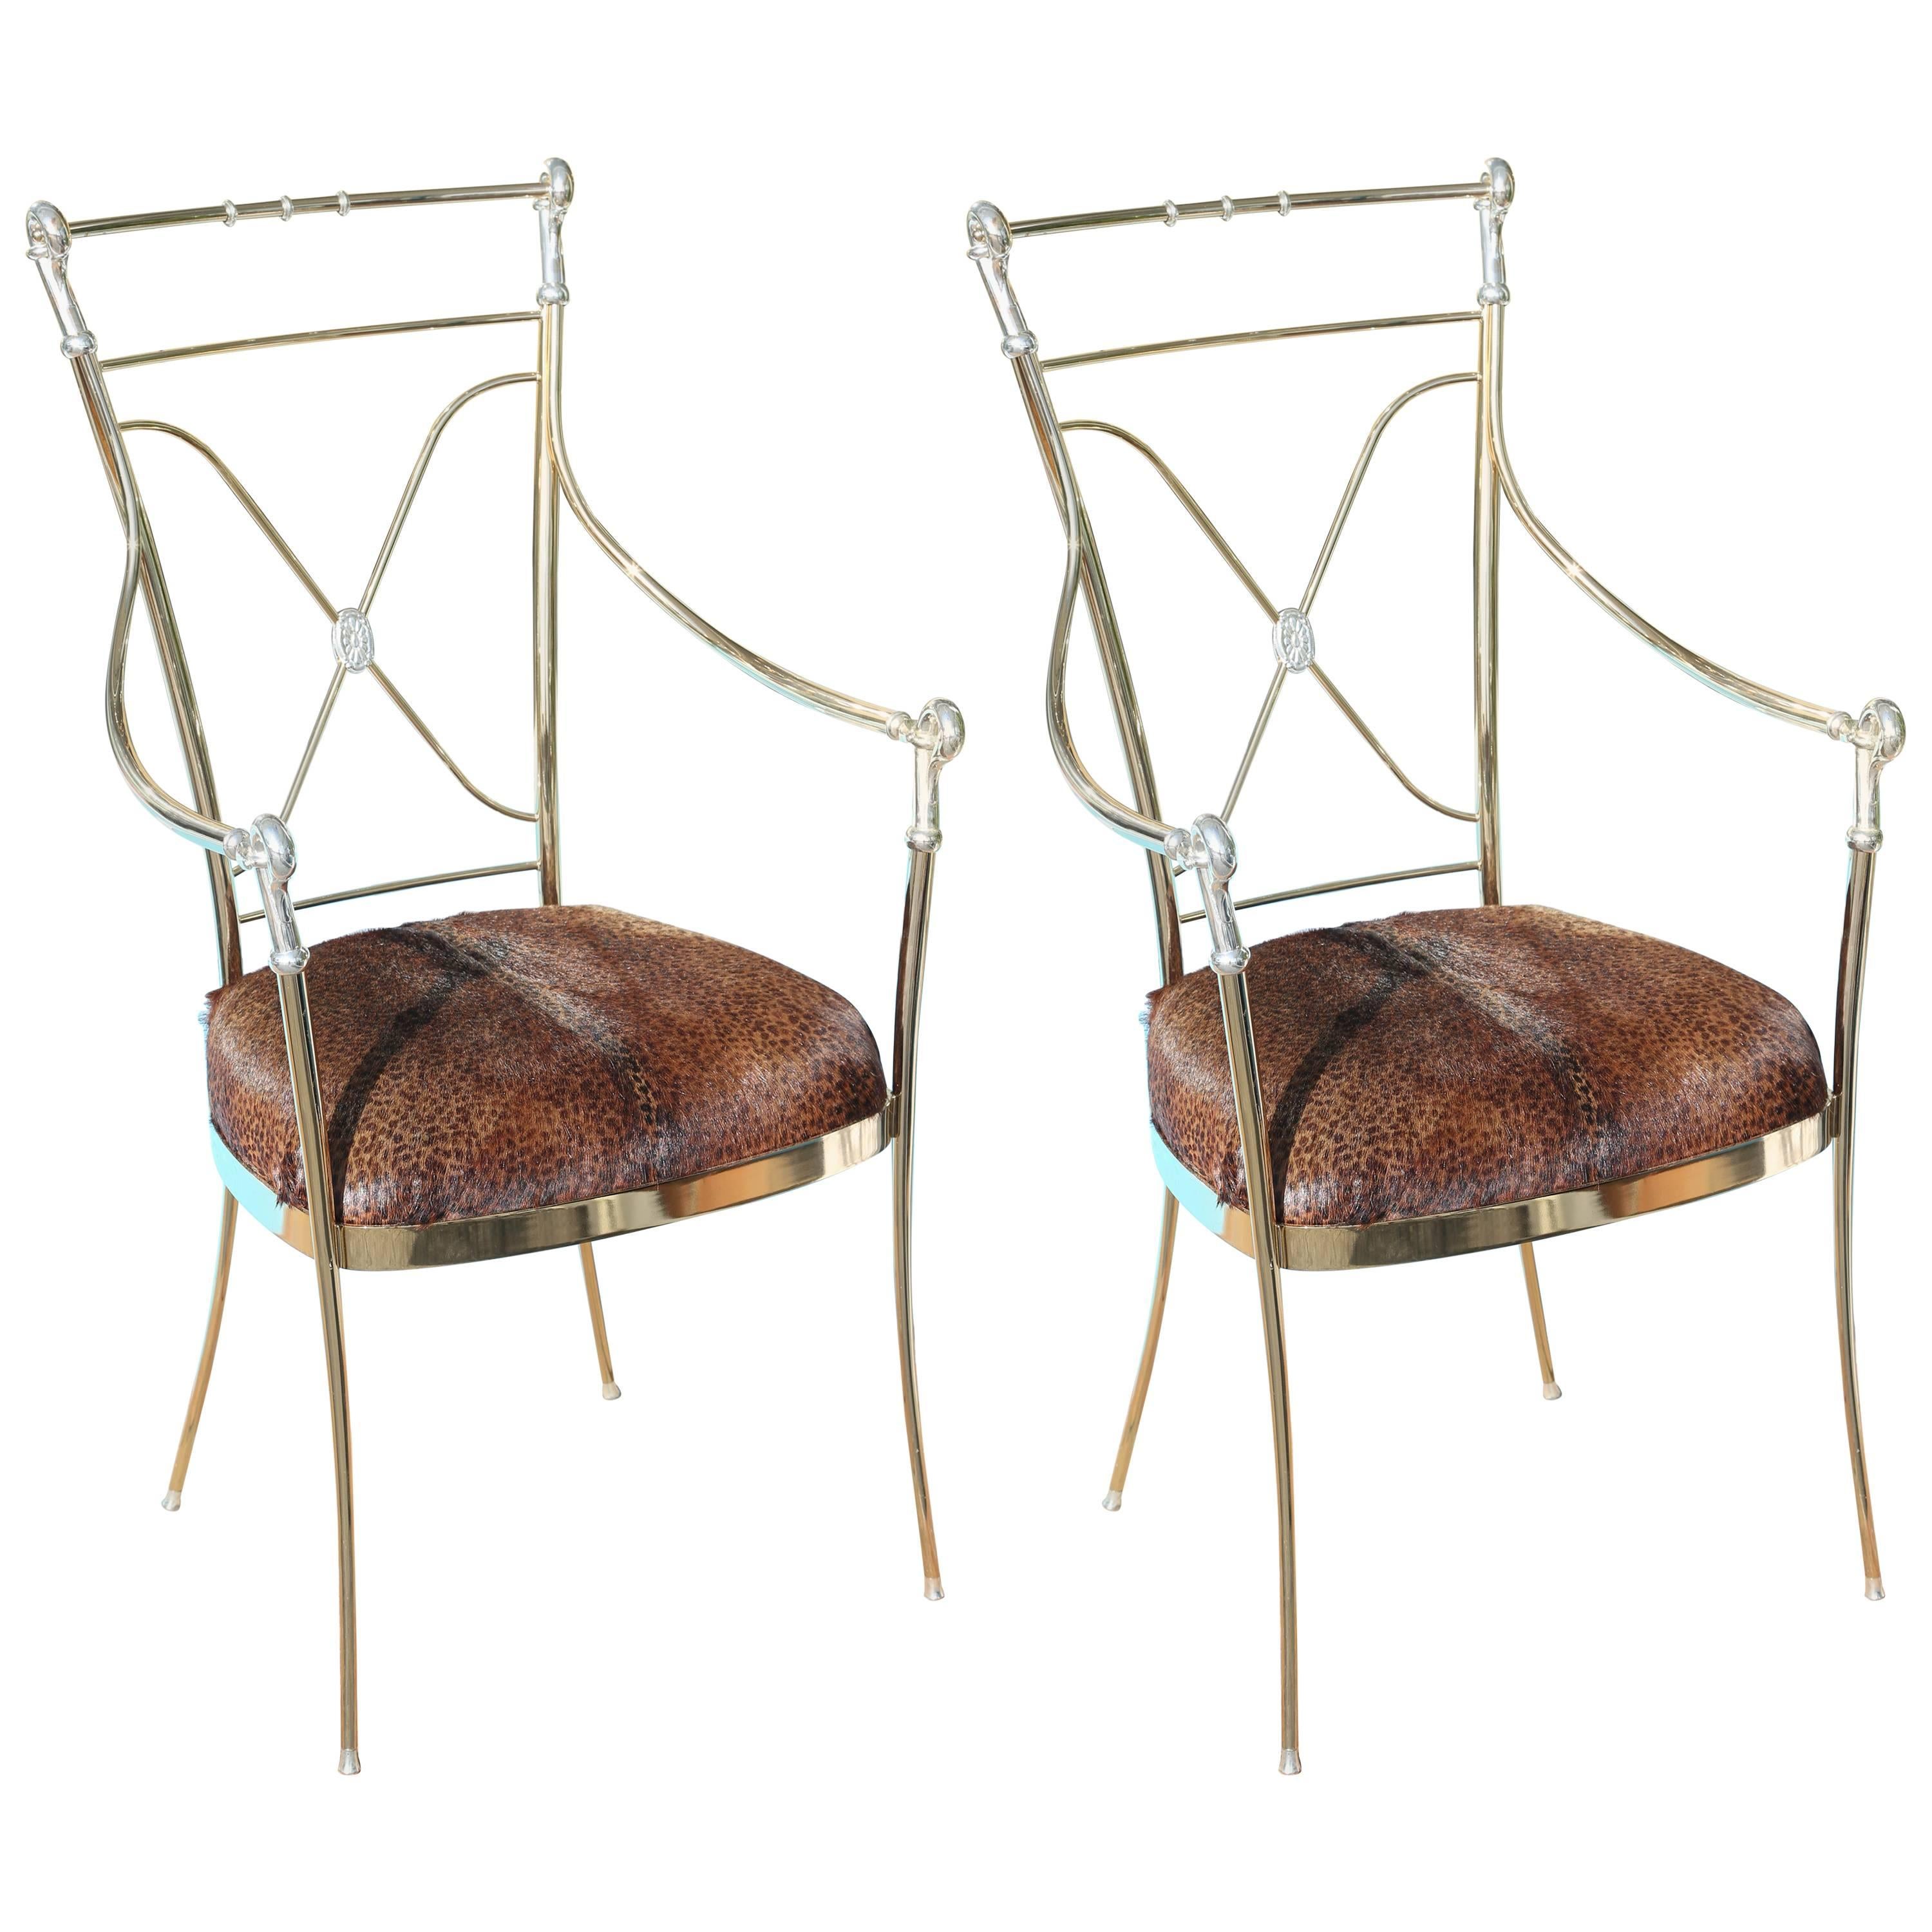 Pair of Hollywood Regency Midcentury Brass and Chrome Armchairs